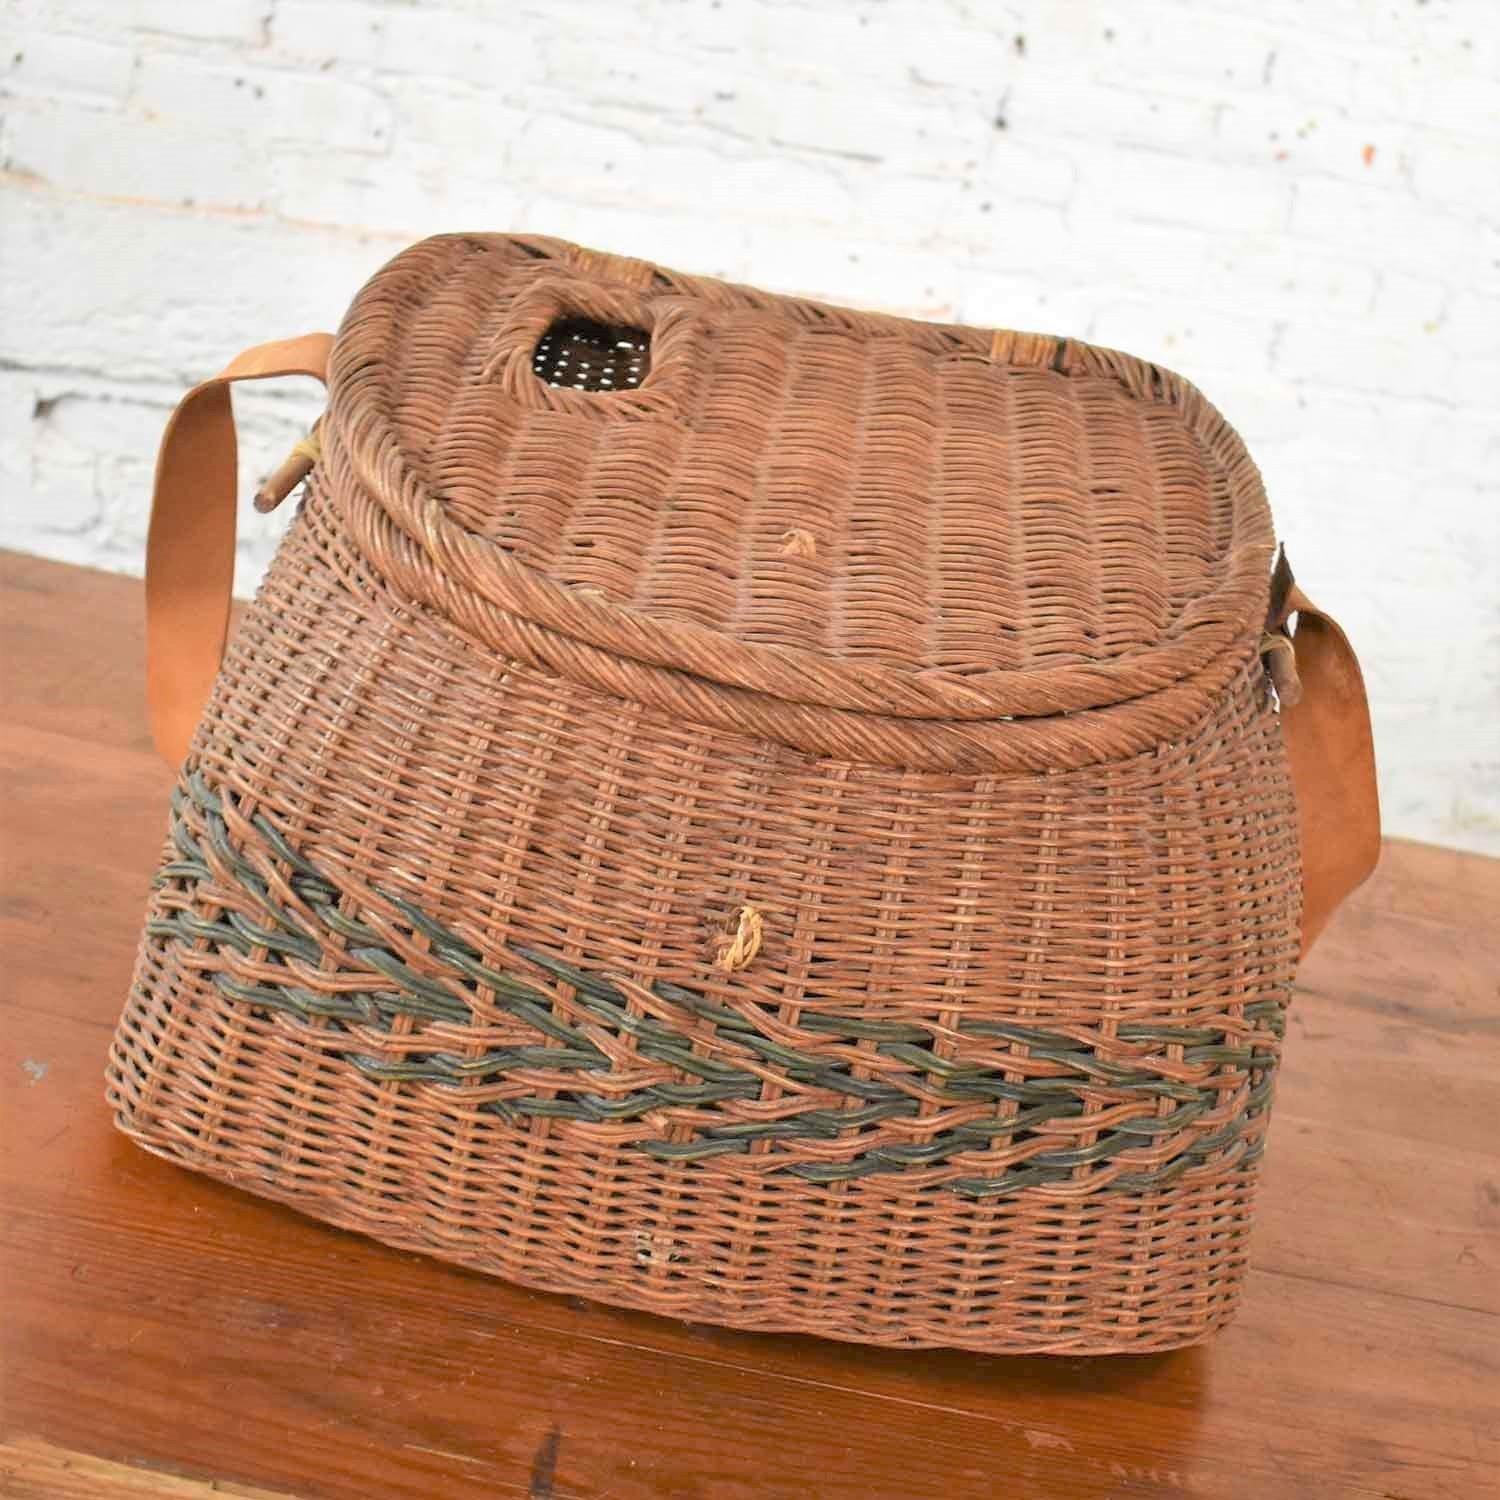 20th Century Antique Wicker Basket Fishing Creel with Leather Strap Handle